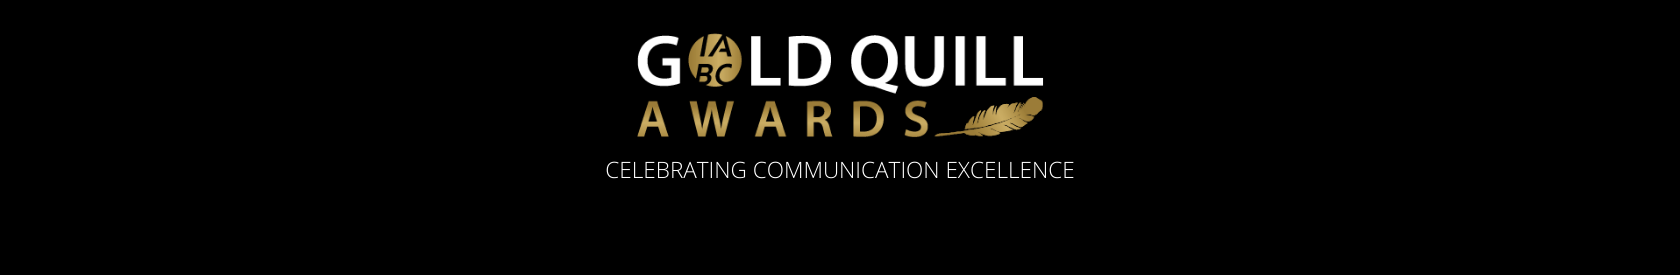 IABC Gold Quill Awards